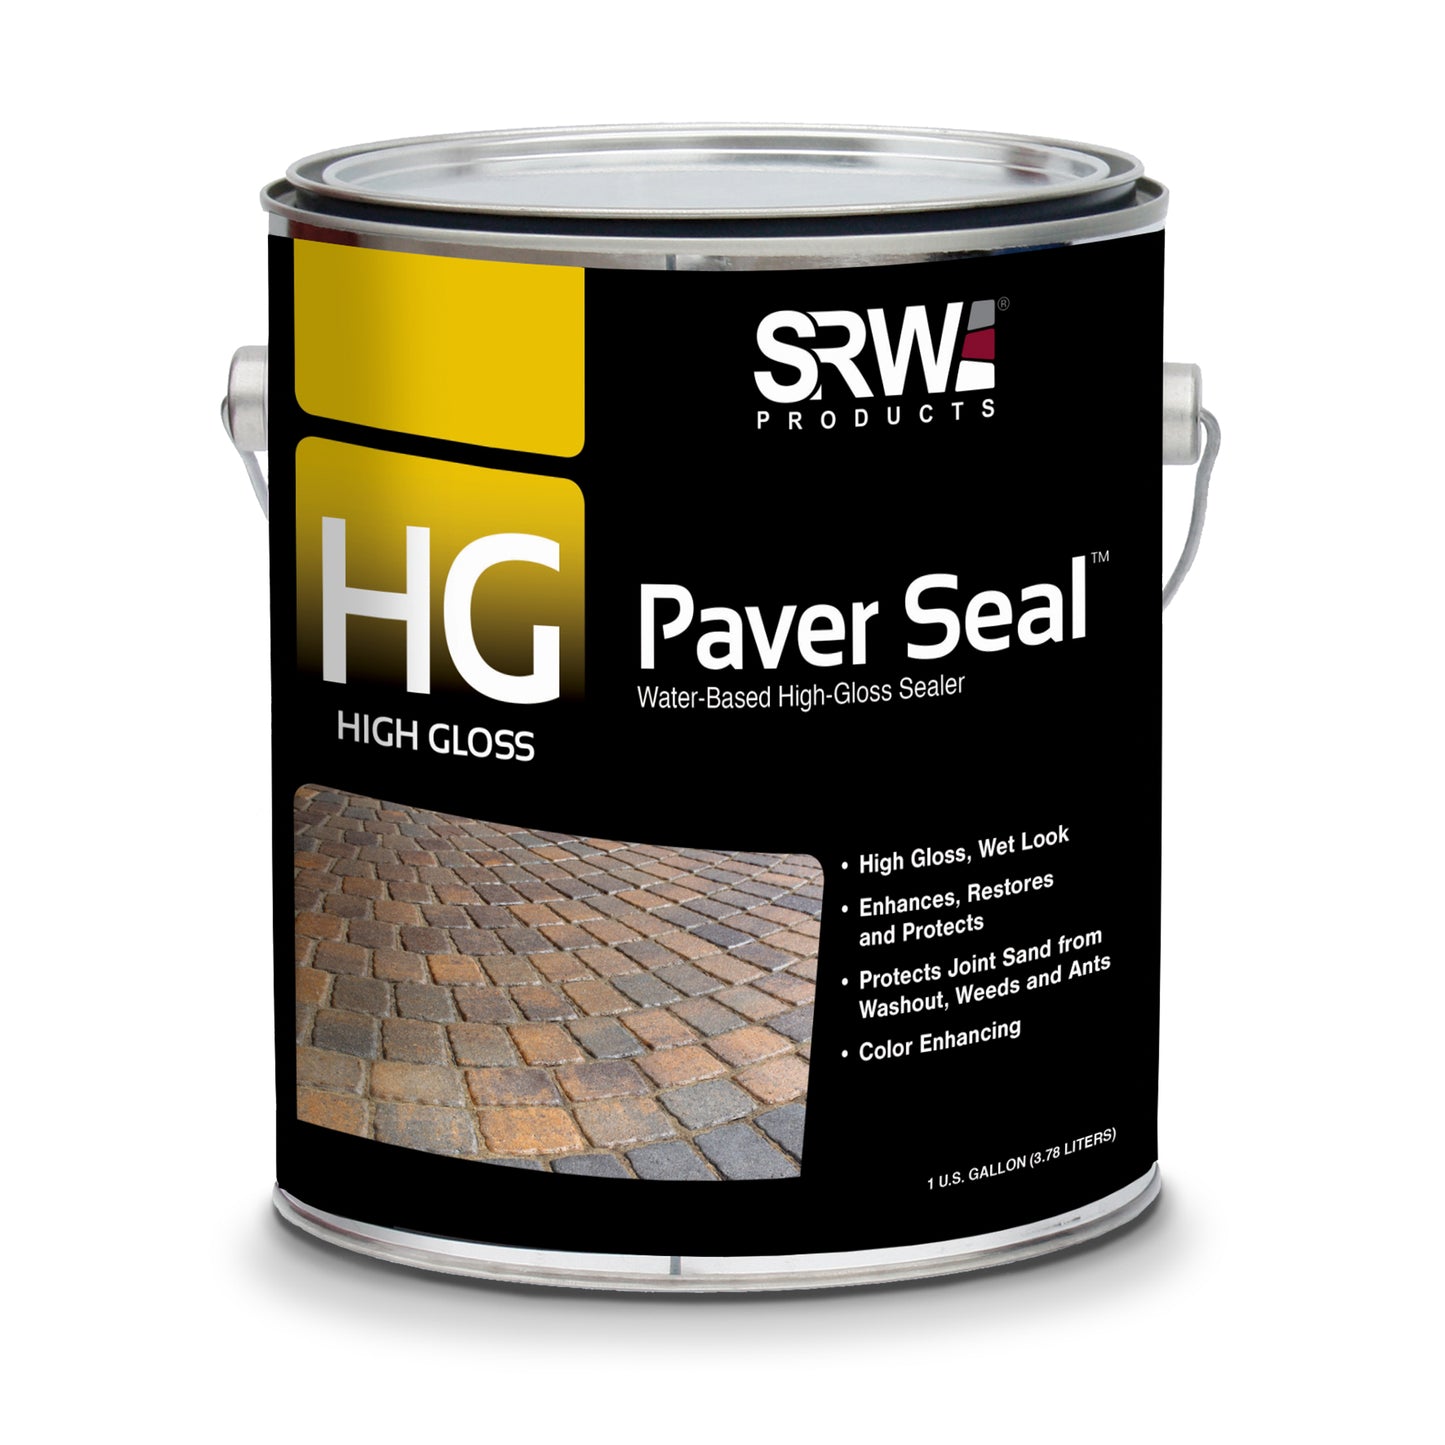 SRW Products HG High Gloss - Paver Seal™